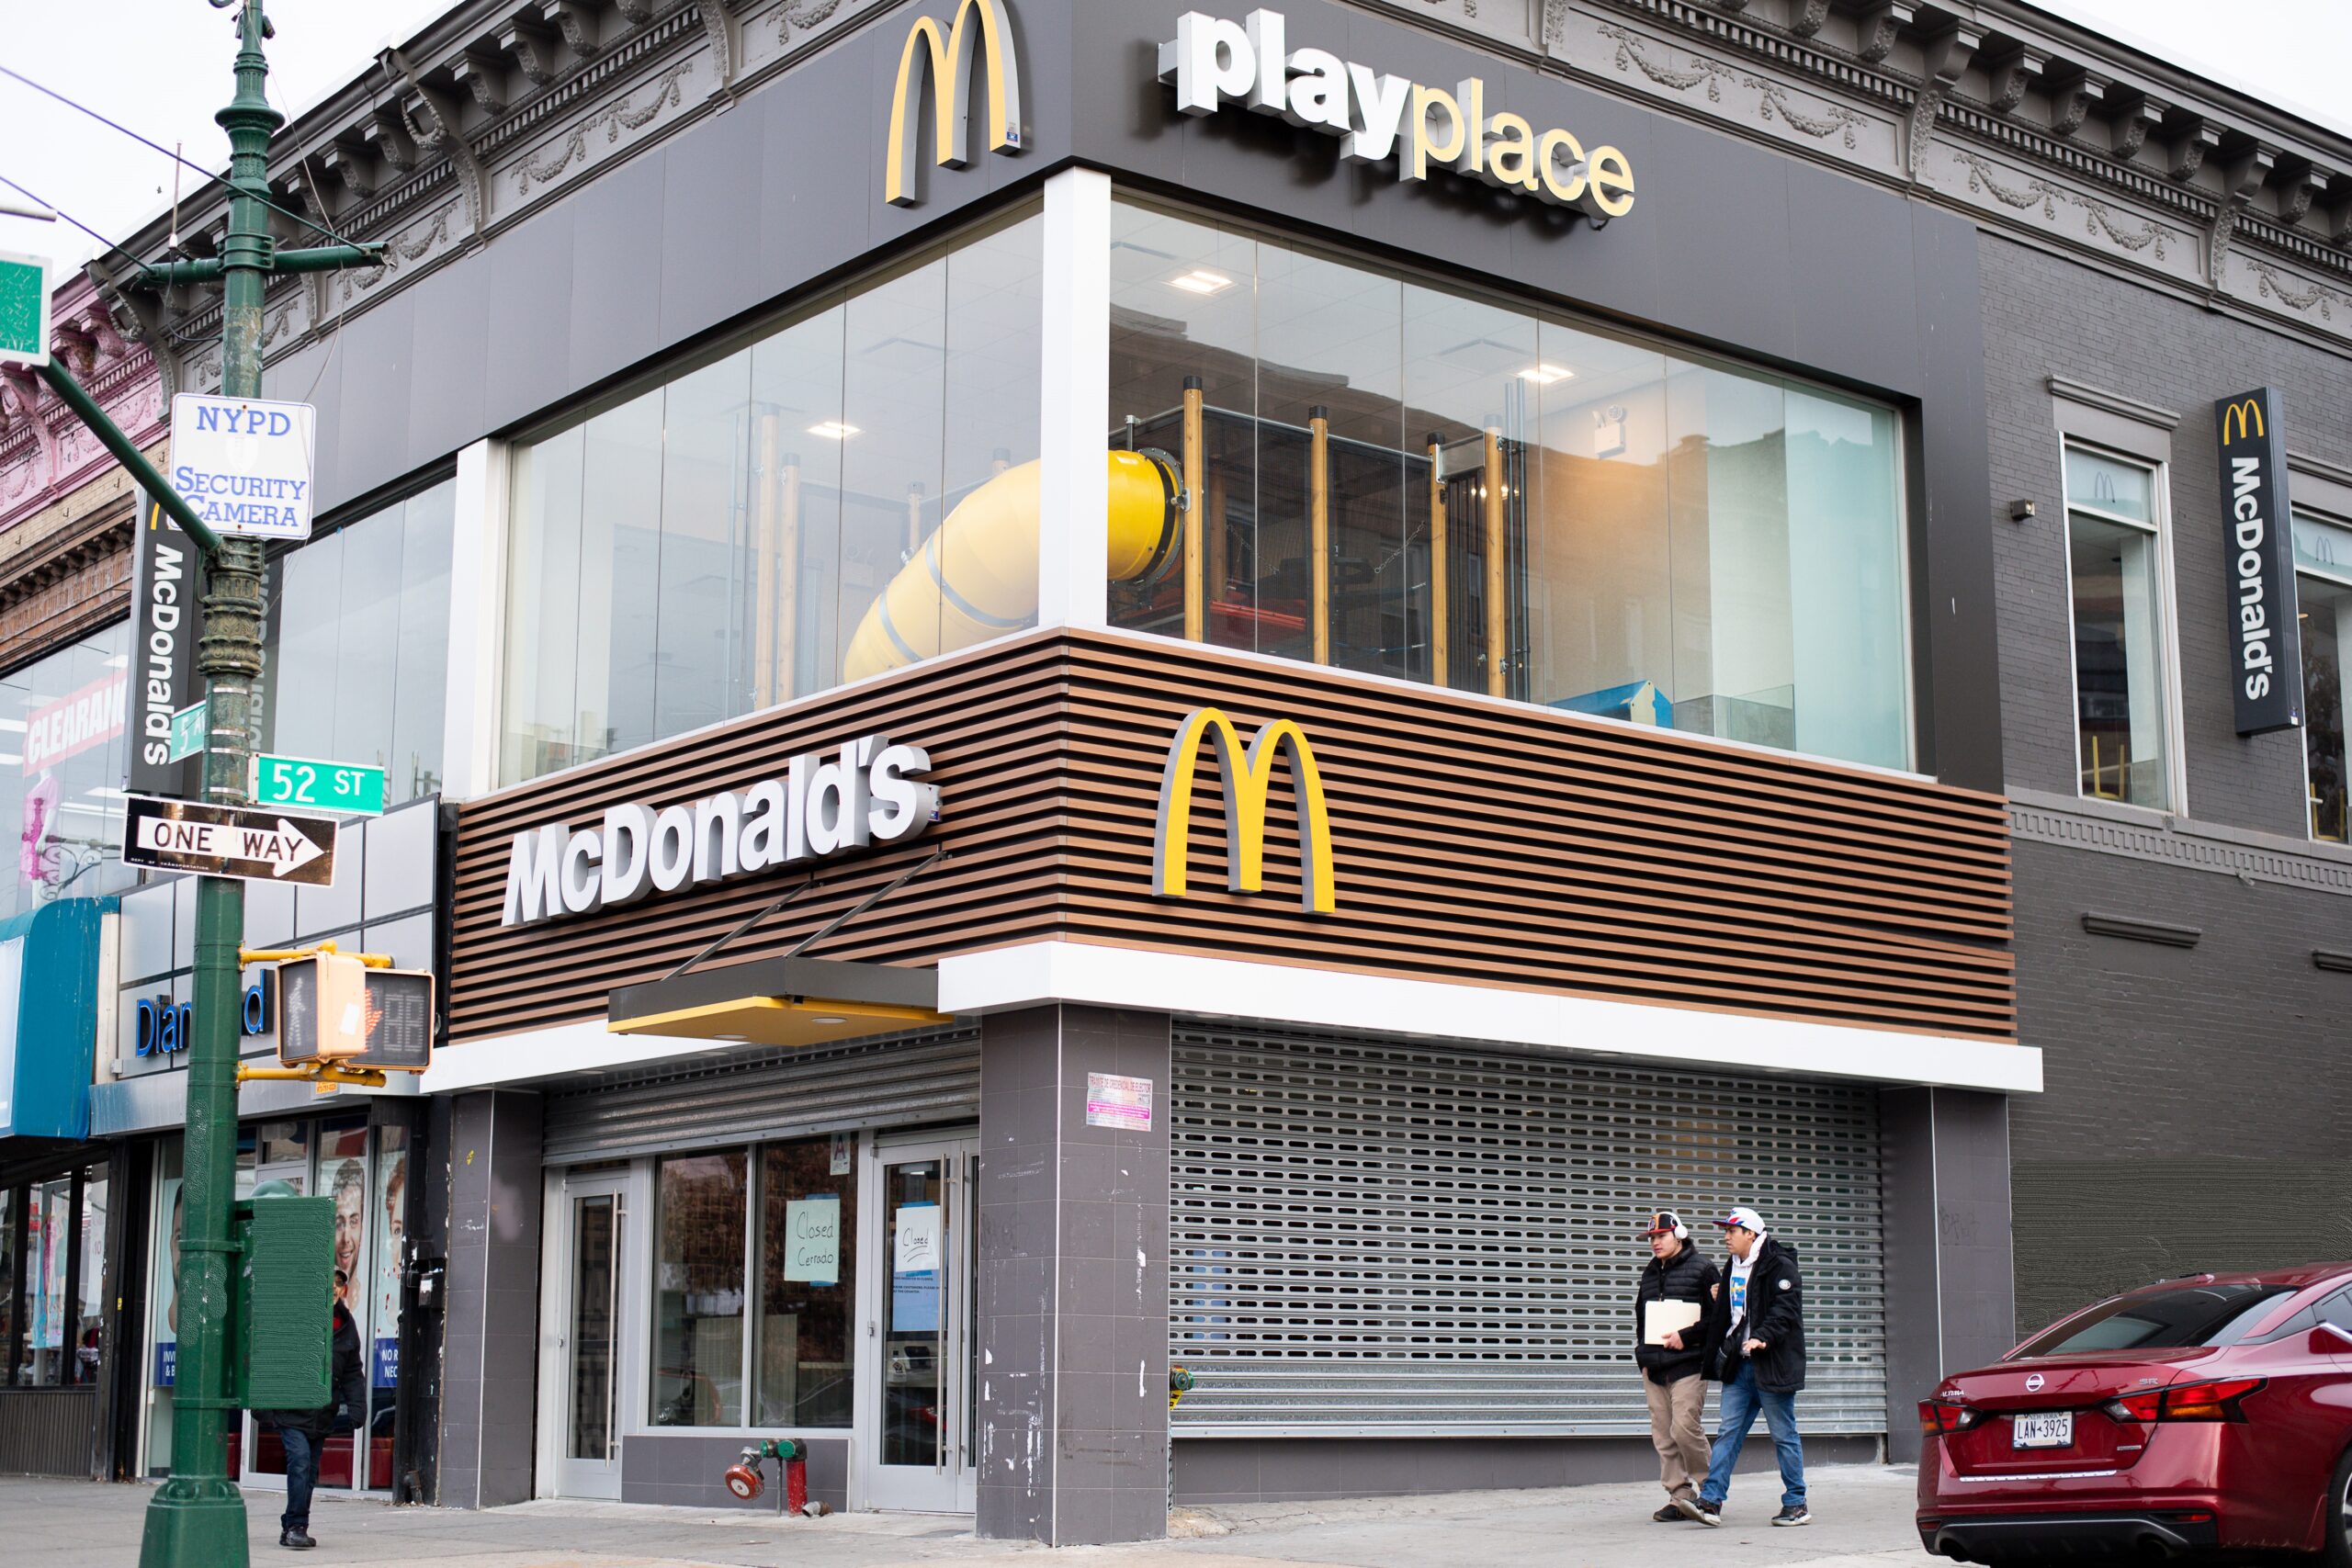 Modern two-story mcdonald's restaurant with playplace, located on a city corner with pedestrians passing by. the facade features large glass windows and distinctive branding.